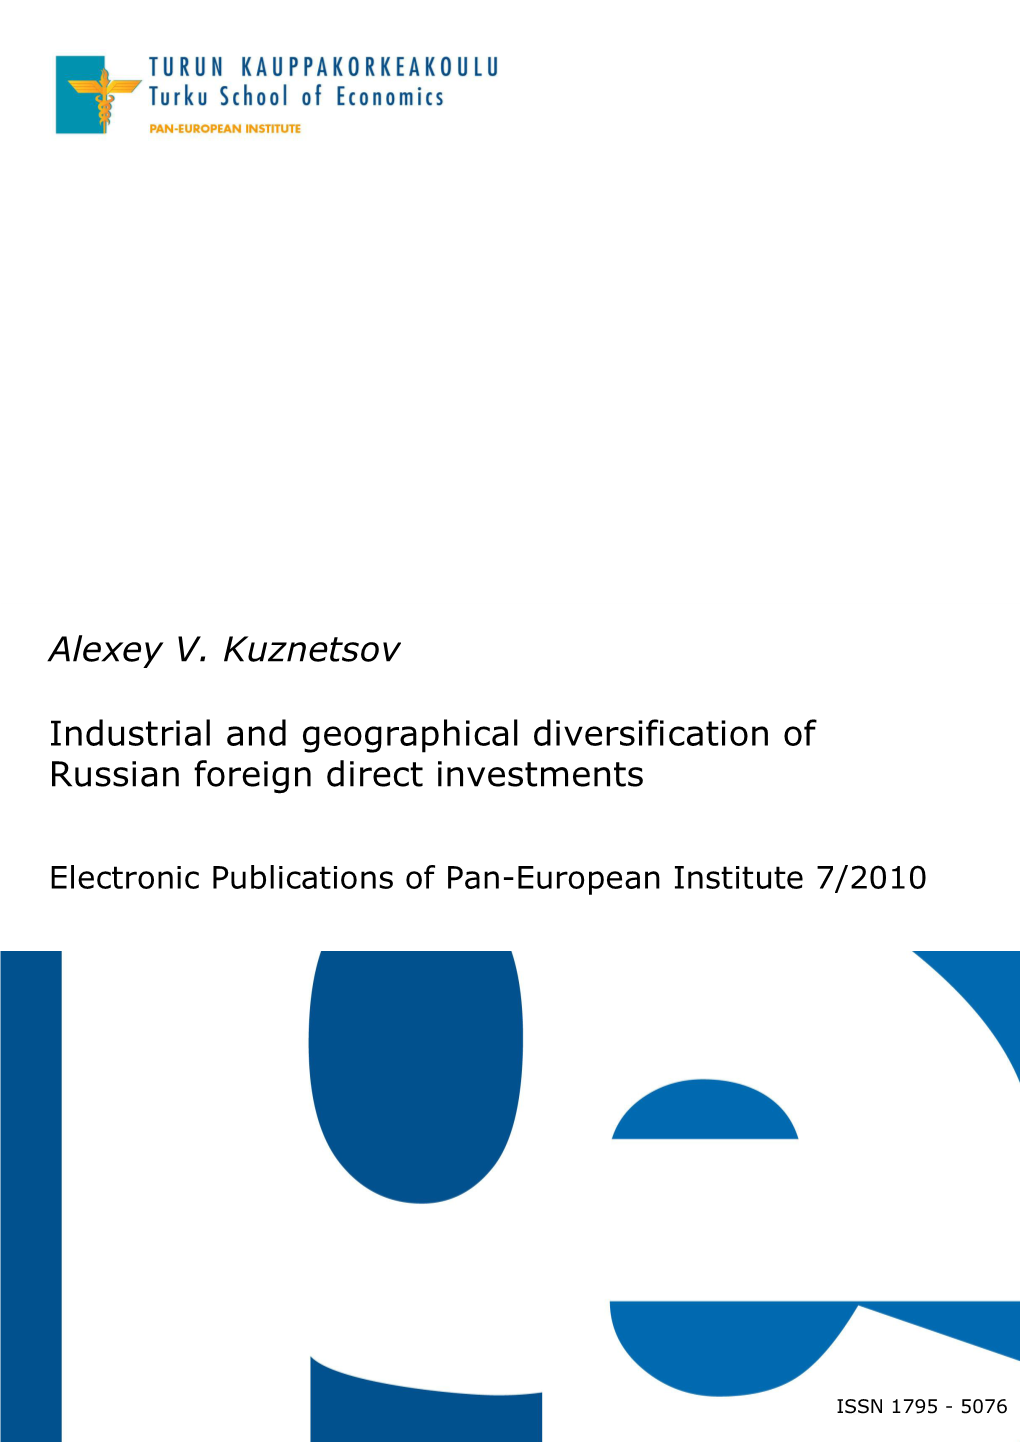 Industrial and Geographical Diversification of Russian Foreign Direct Investments